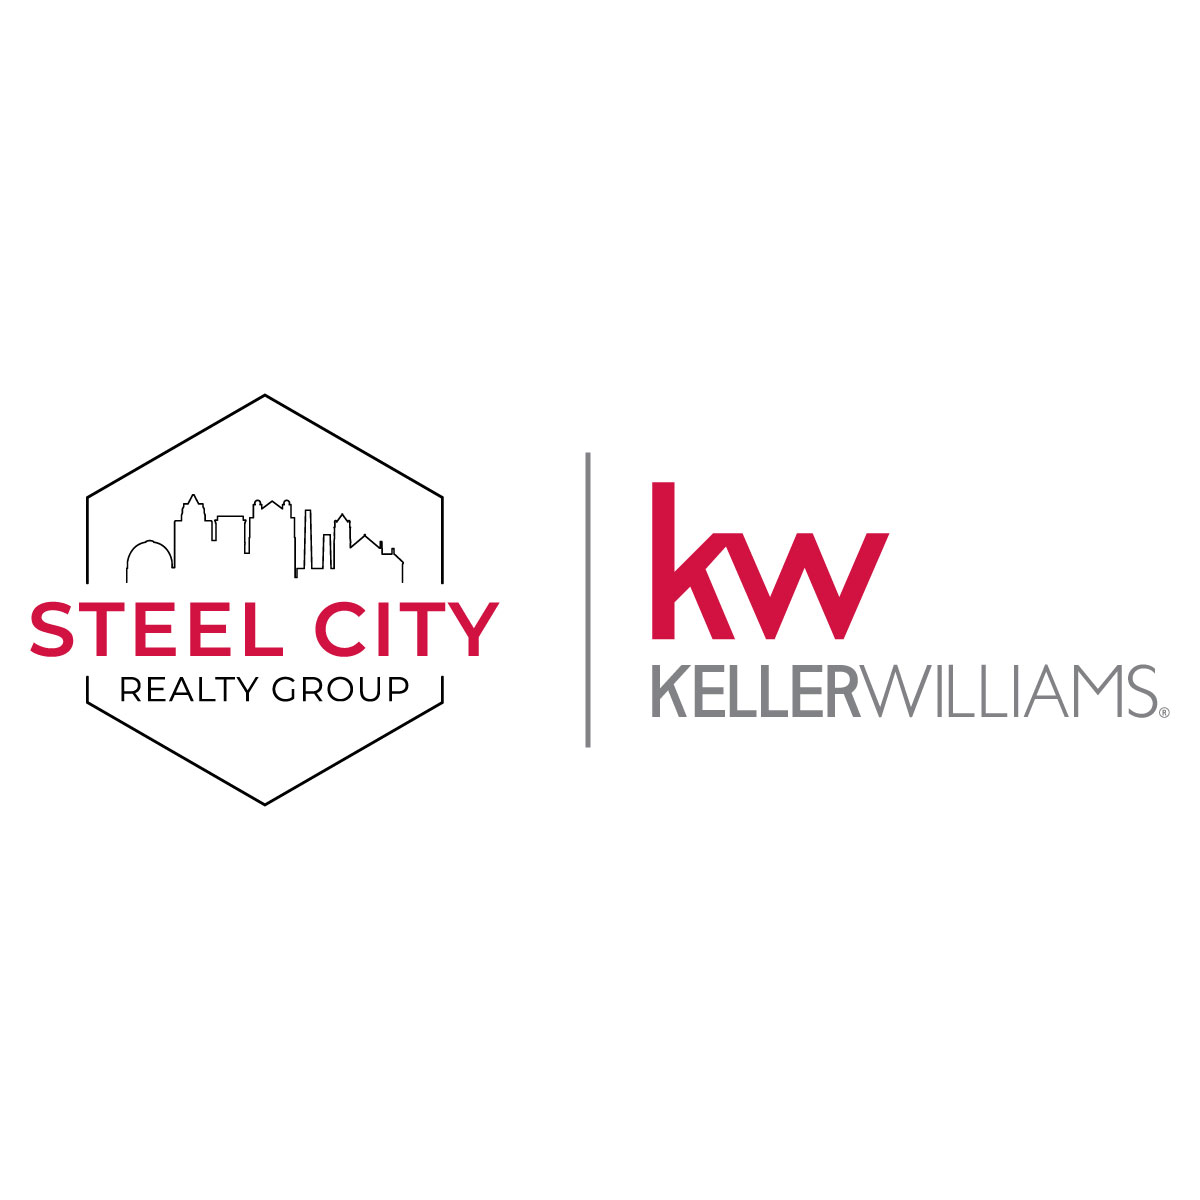 Steel City Realty Group